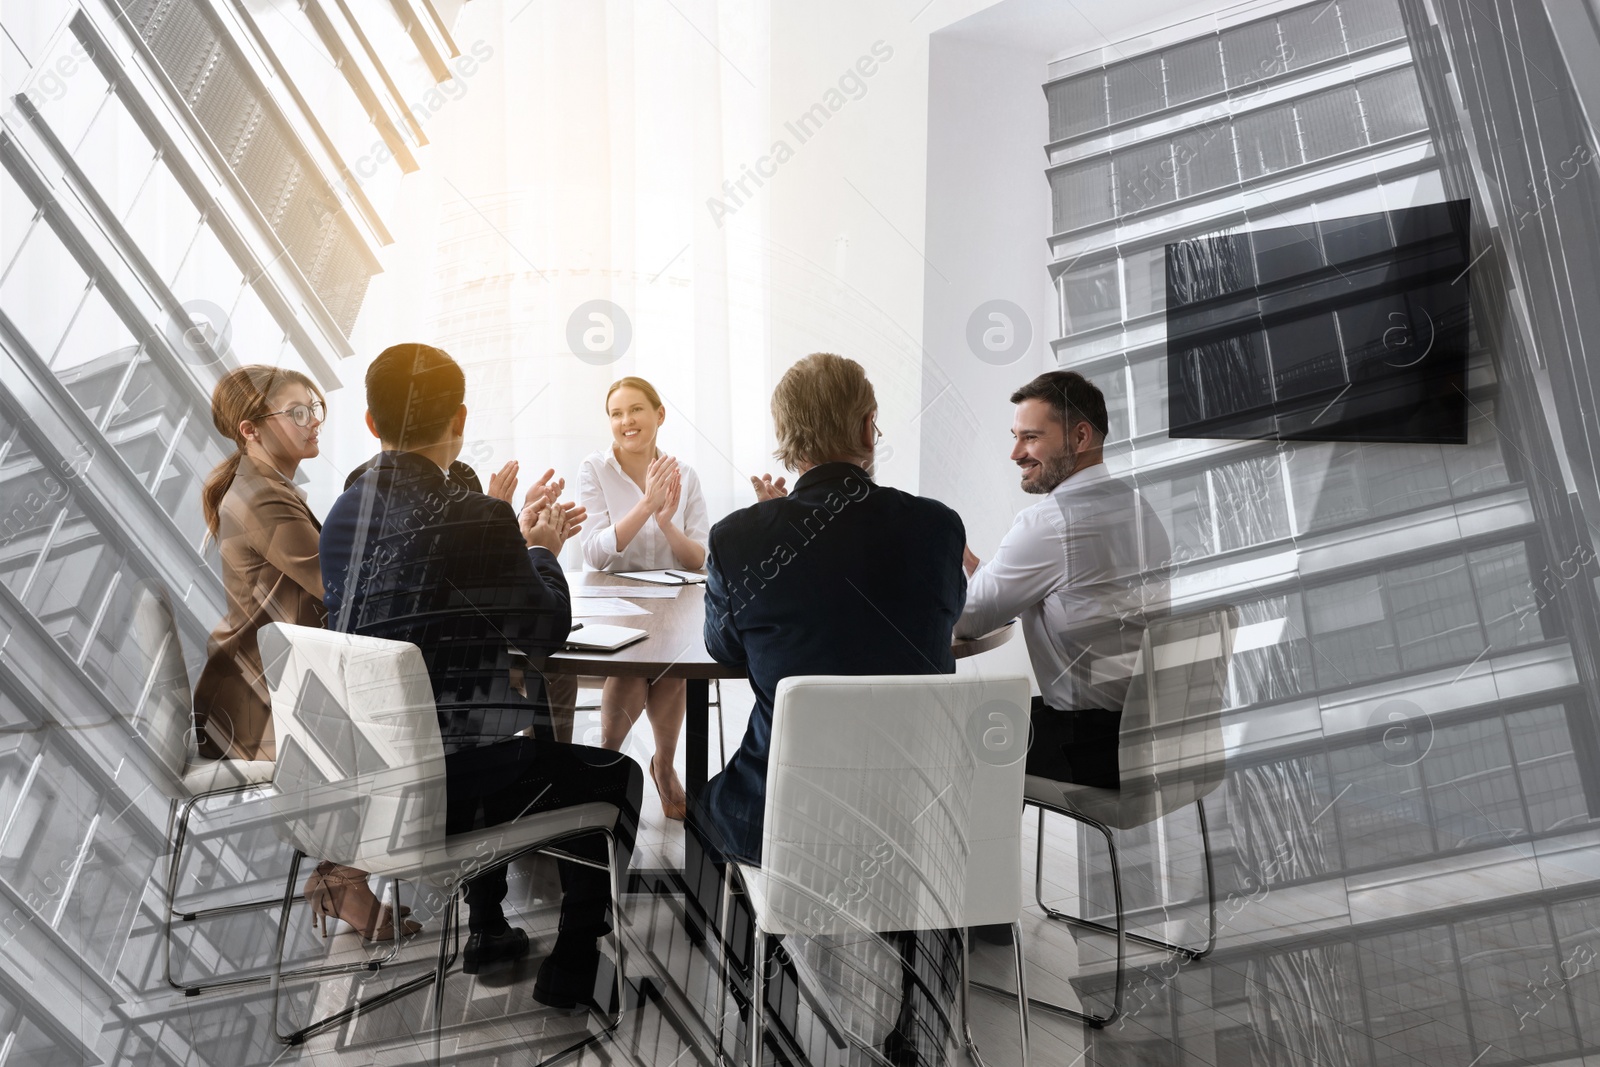 Image of Partnership, cooperation, collaboration. Double exposure of buildings and people in meeting room